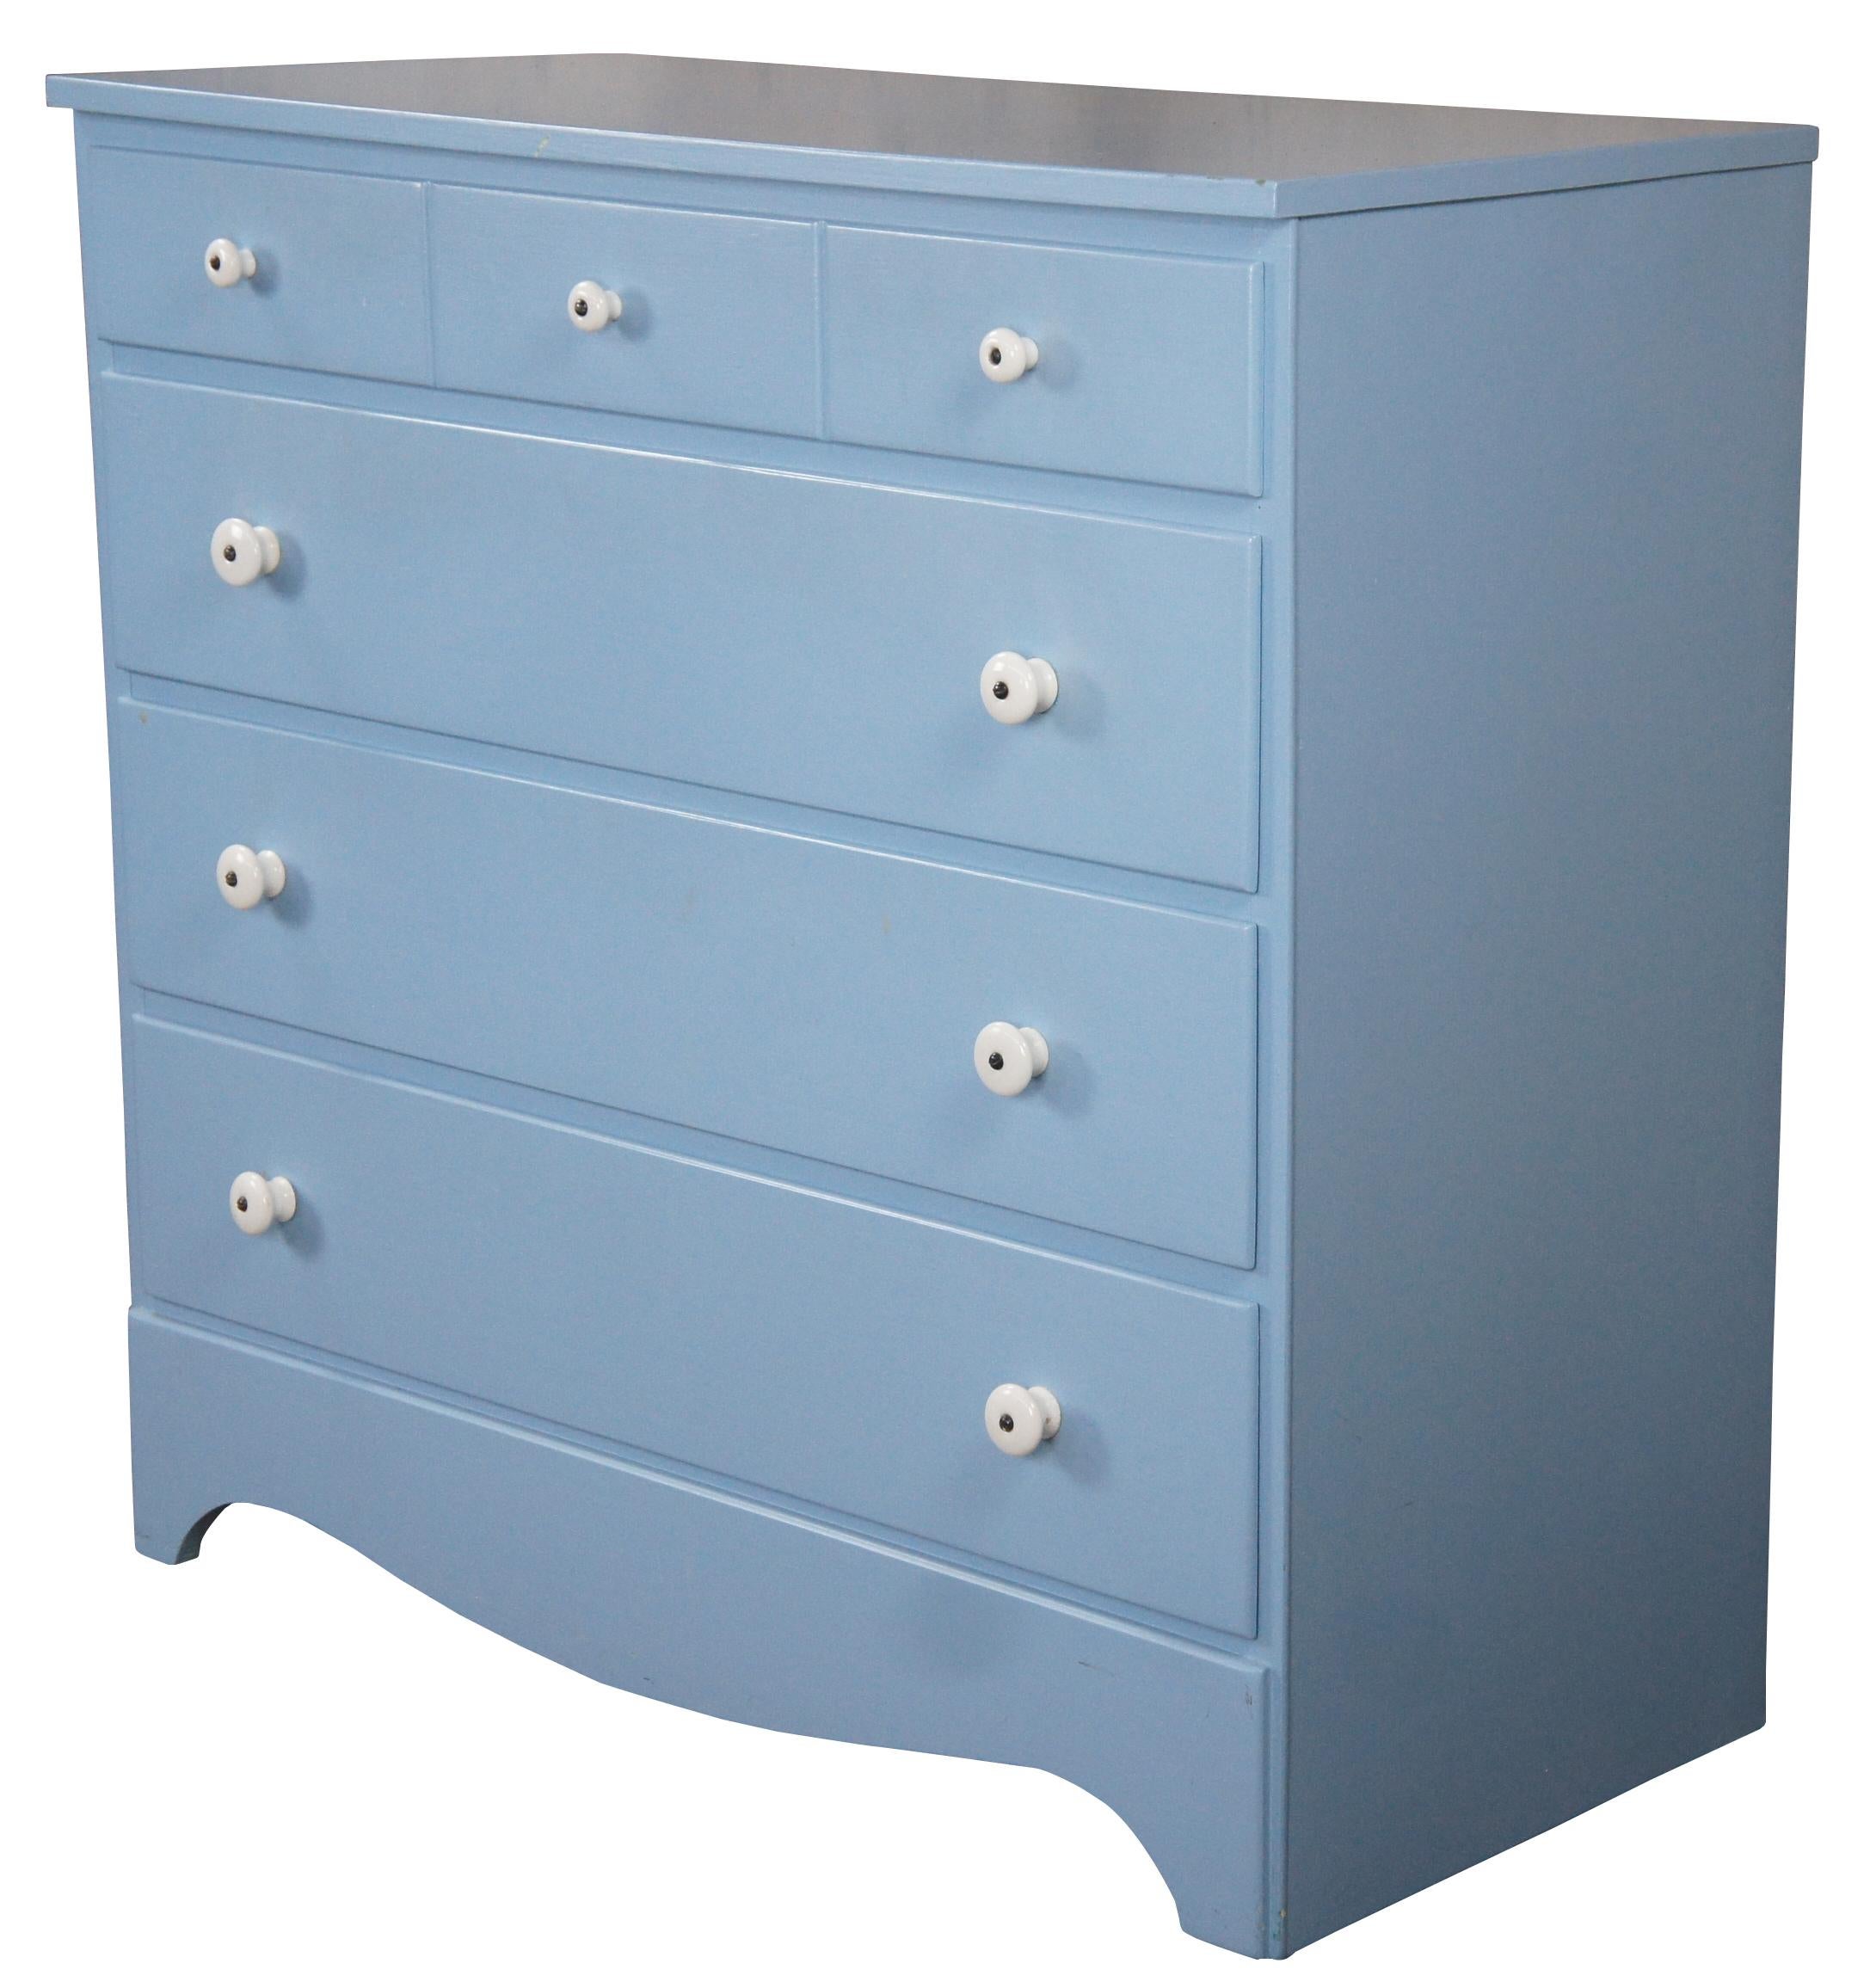 Vintage Early American style painted four drawers chest or dresser featuring North Carolina blue with white porcelain knob pulls.
  